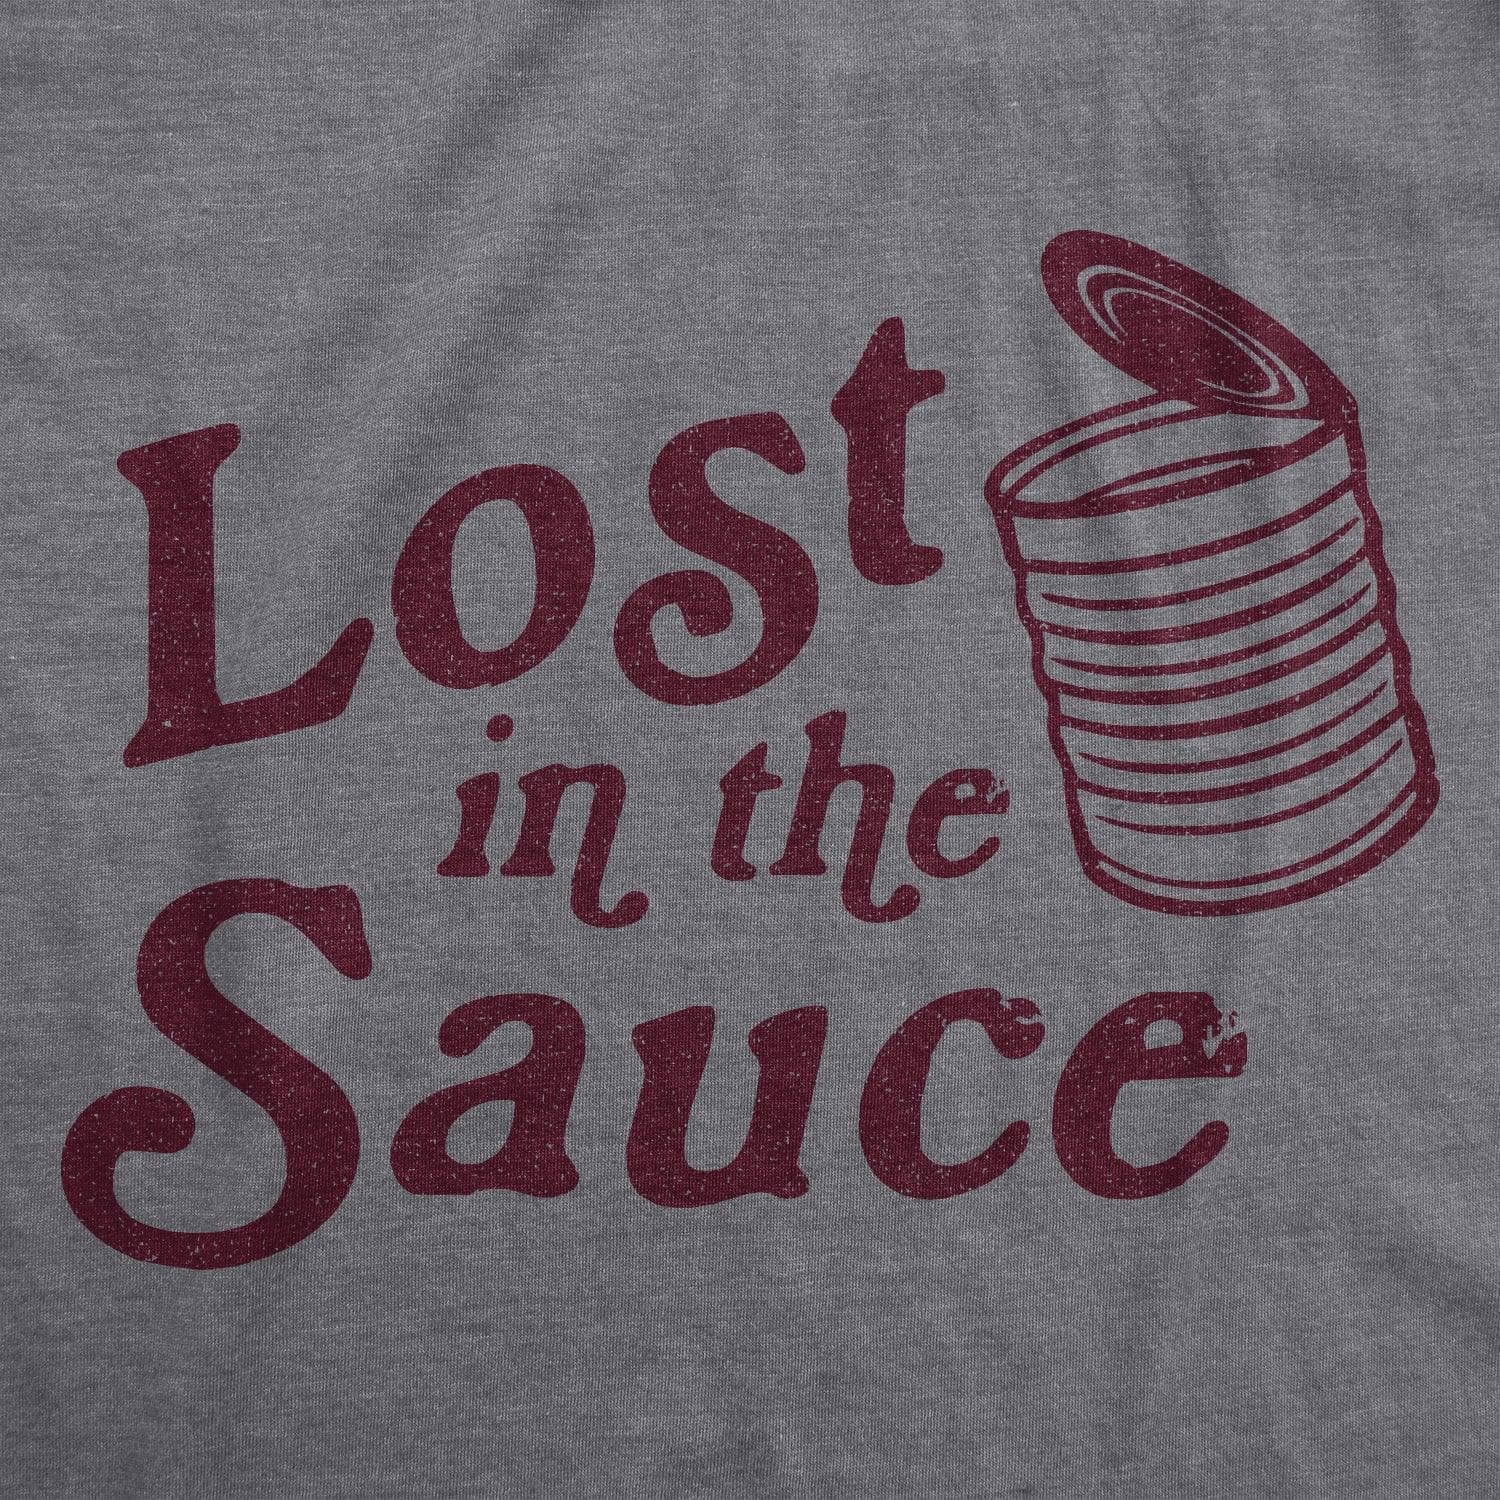 Lost In The Sauce Men's Tshirt  -  Crazy Dog T-Shirts